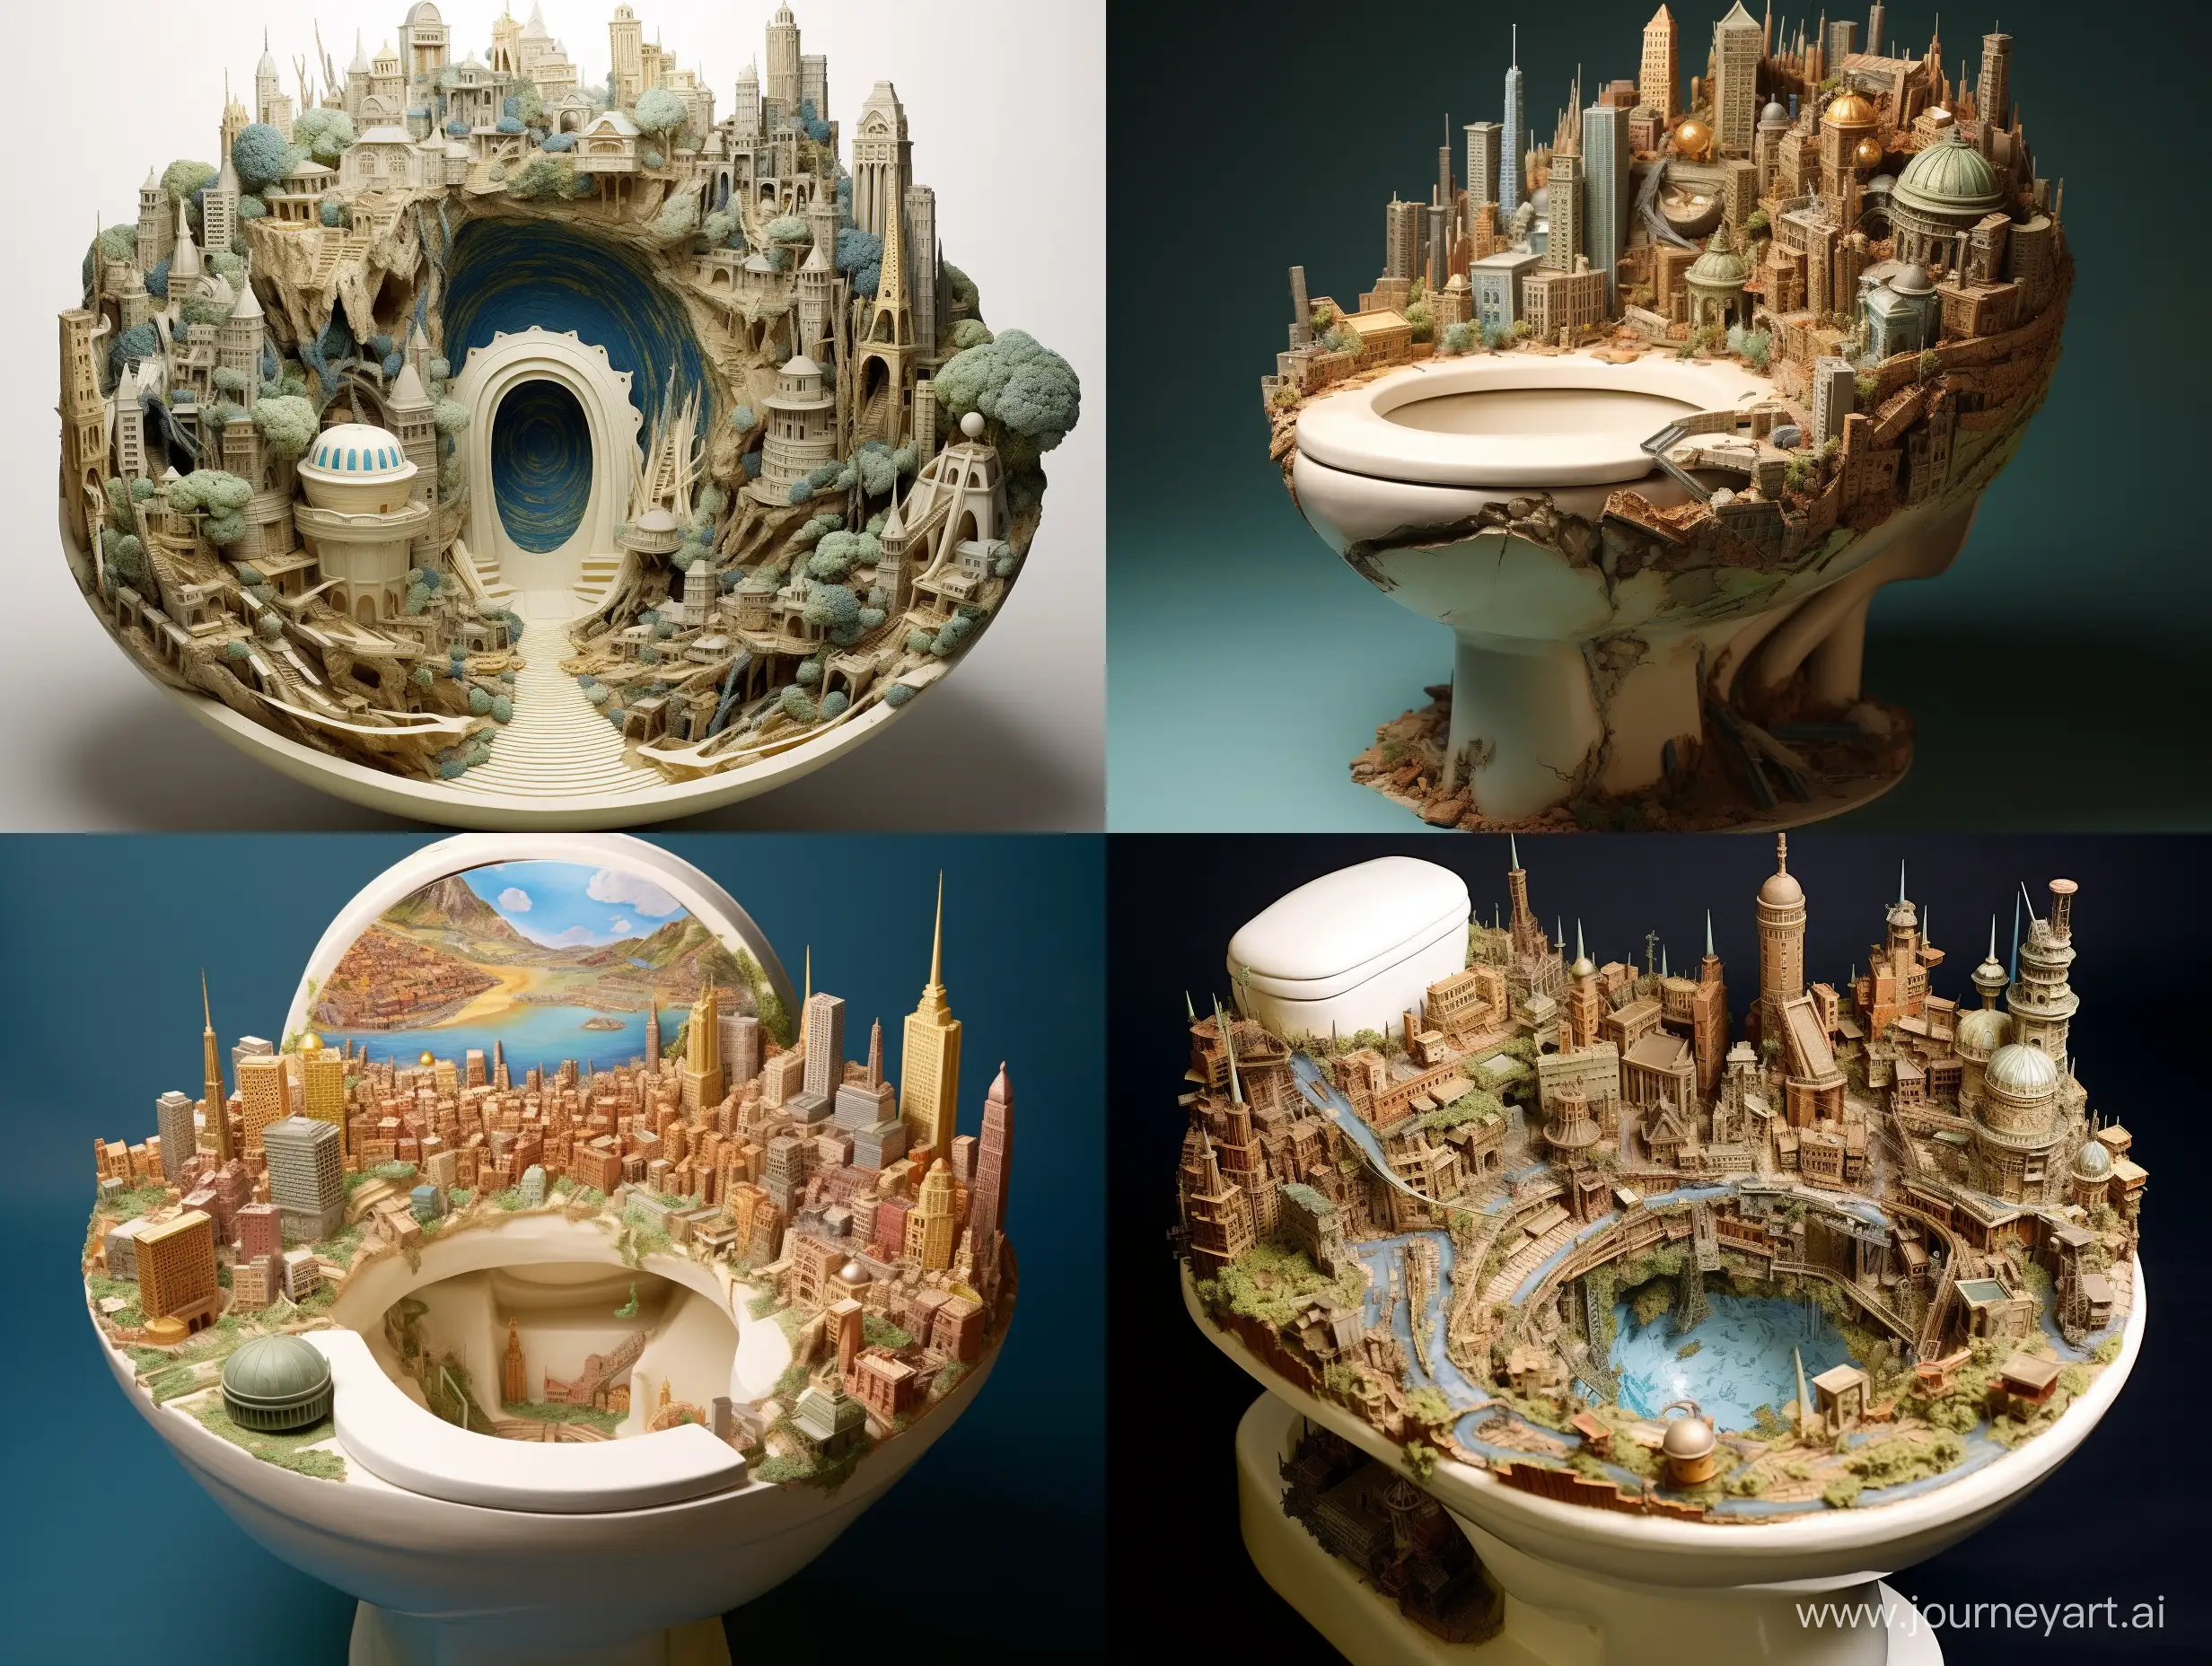 a highly detailed, miniature cityscape and advanced civilization have formed in a toilet bowl